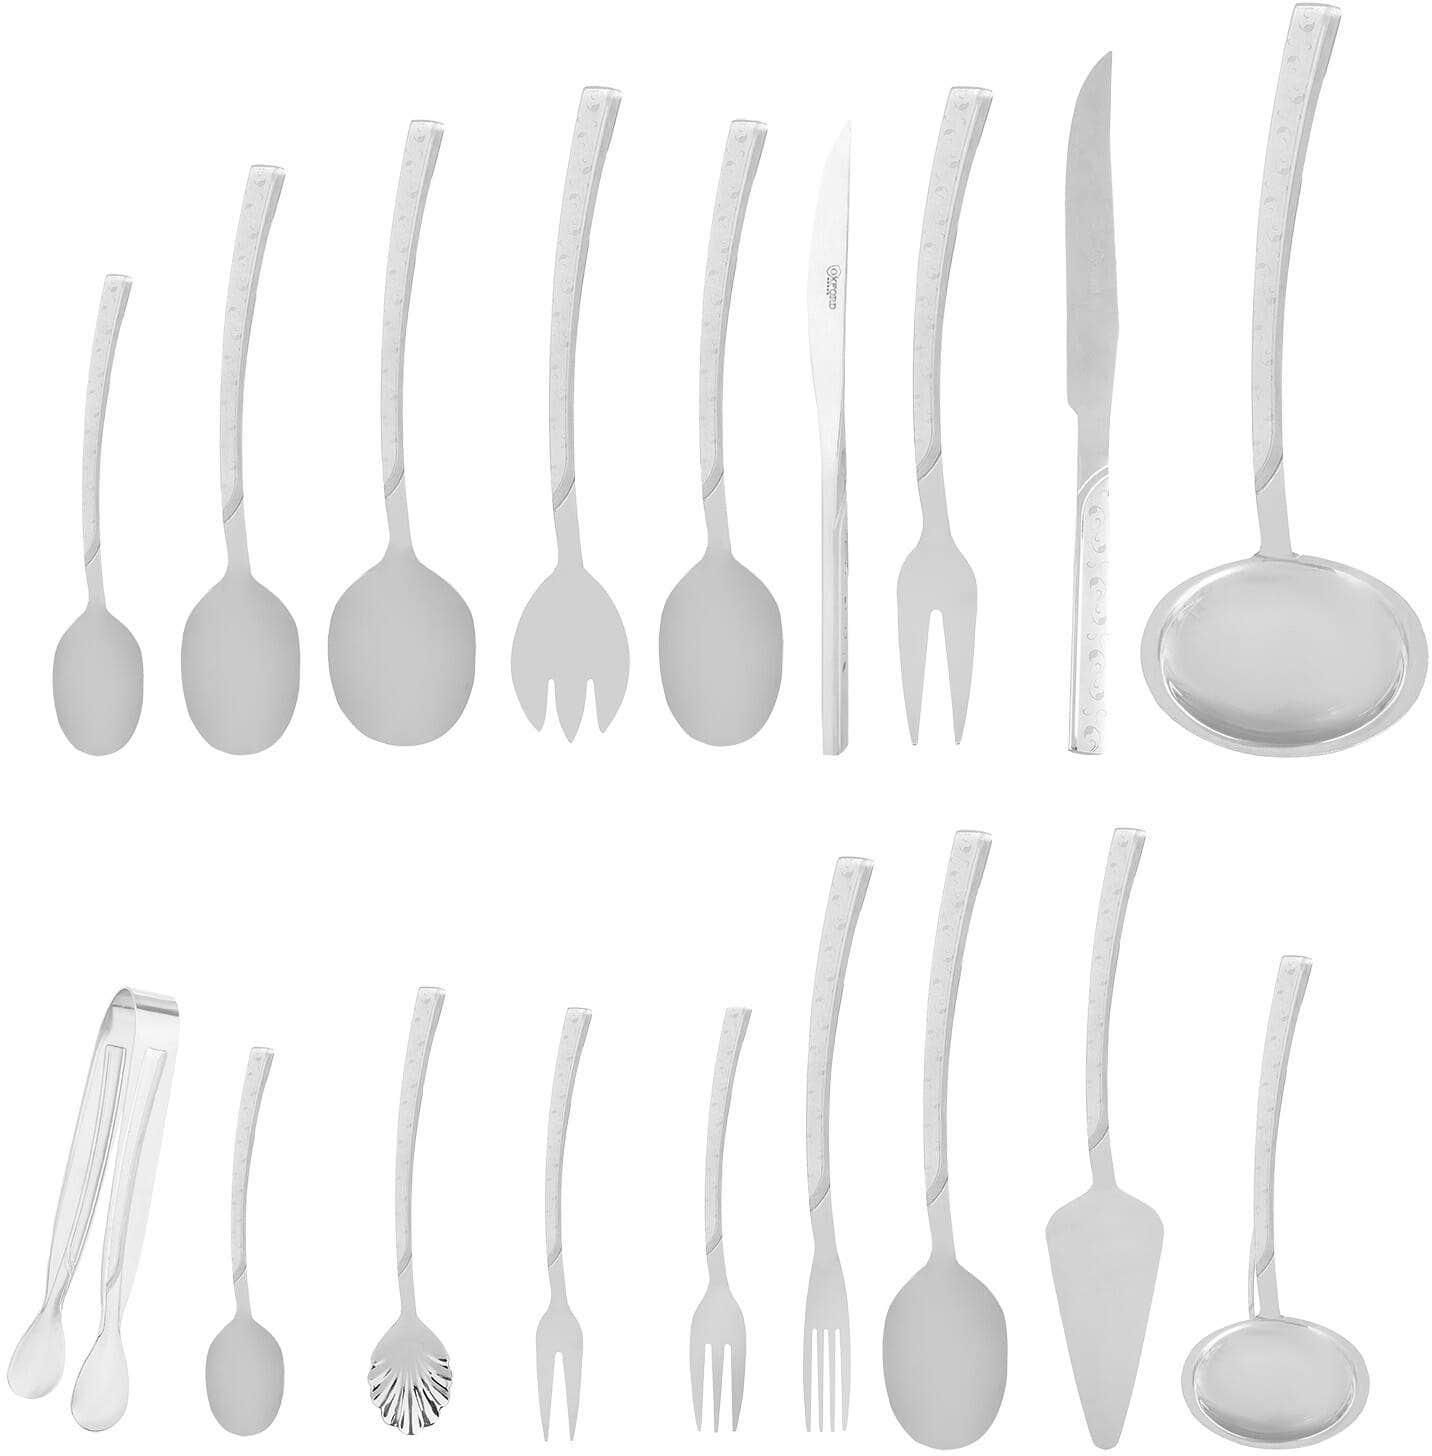 Get Oxford Stainless Steel Cutlery Set, 86 Pieces - Silver with best offers | Raneen.com